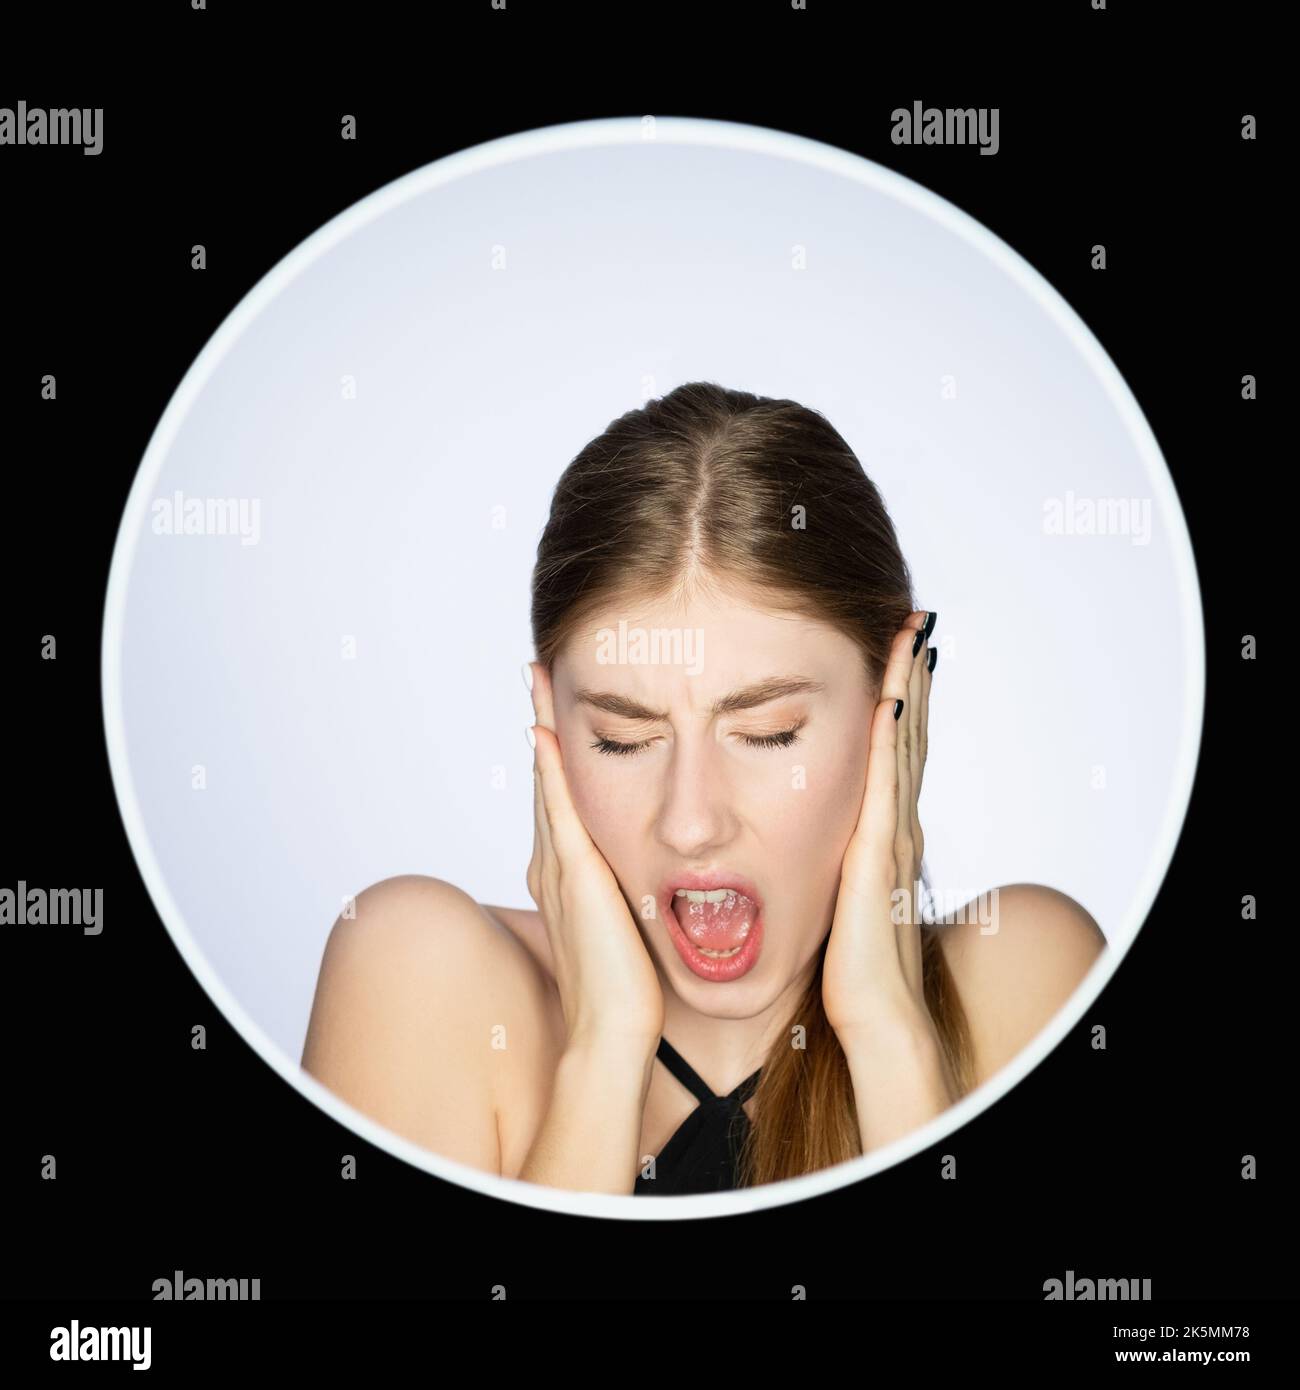 Frustrated woman face. Anxiety attack. Nervous breakdown. Headshot portrait of disturbed annoyed girl yelling covering ears isolated on light in circl Stock Photo